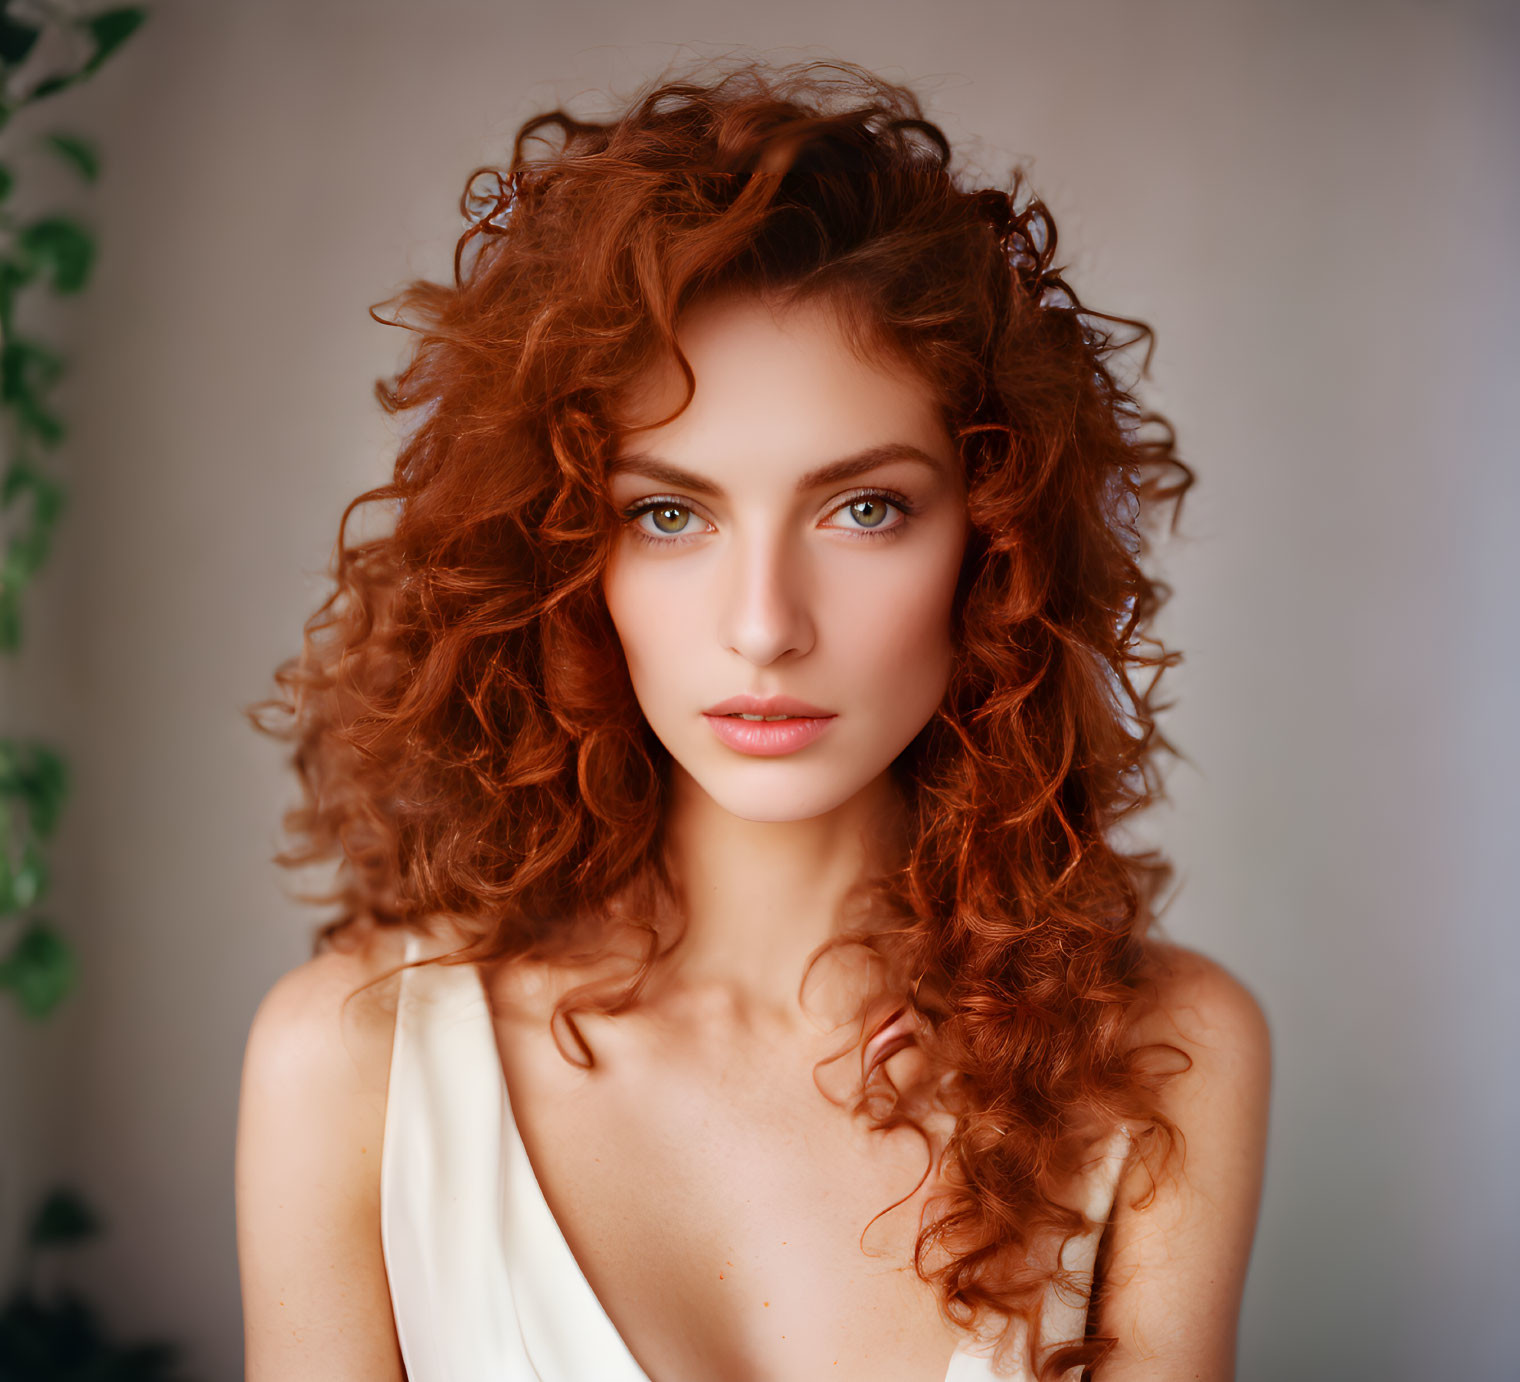 Curly red-haired woman with green eyes in soft background portrait